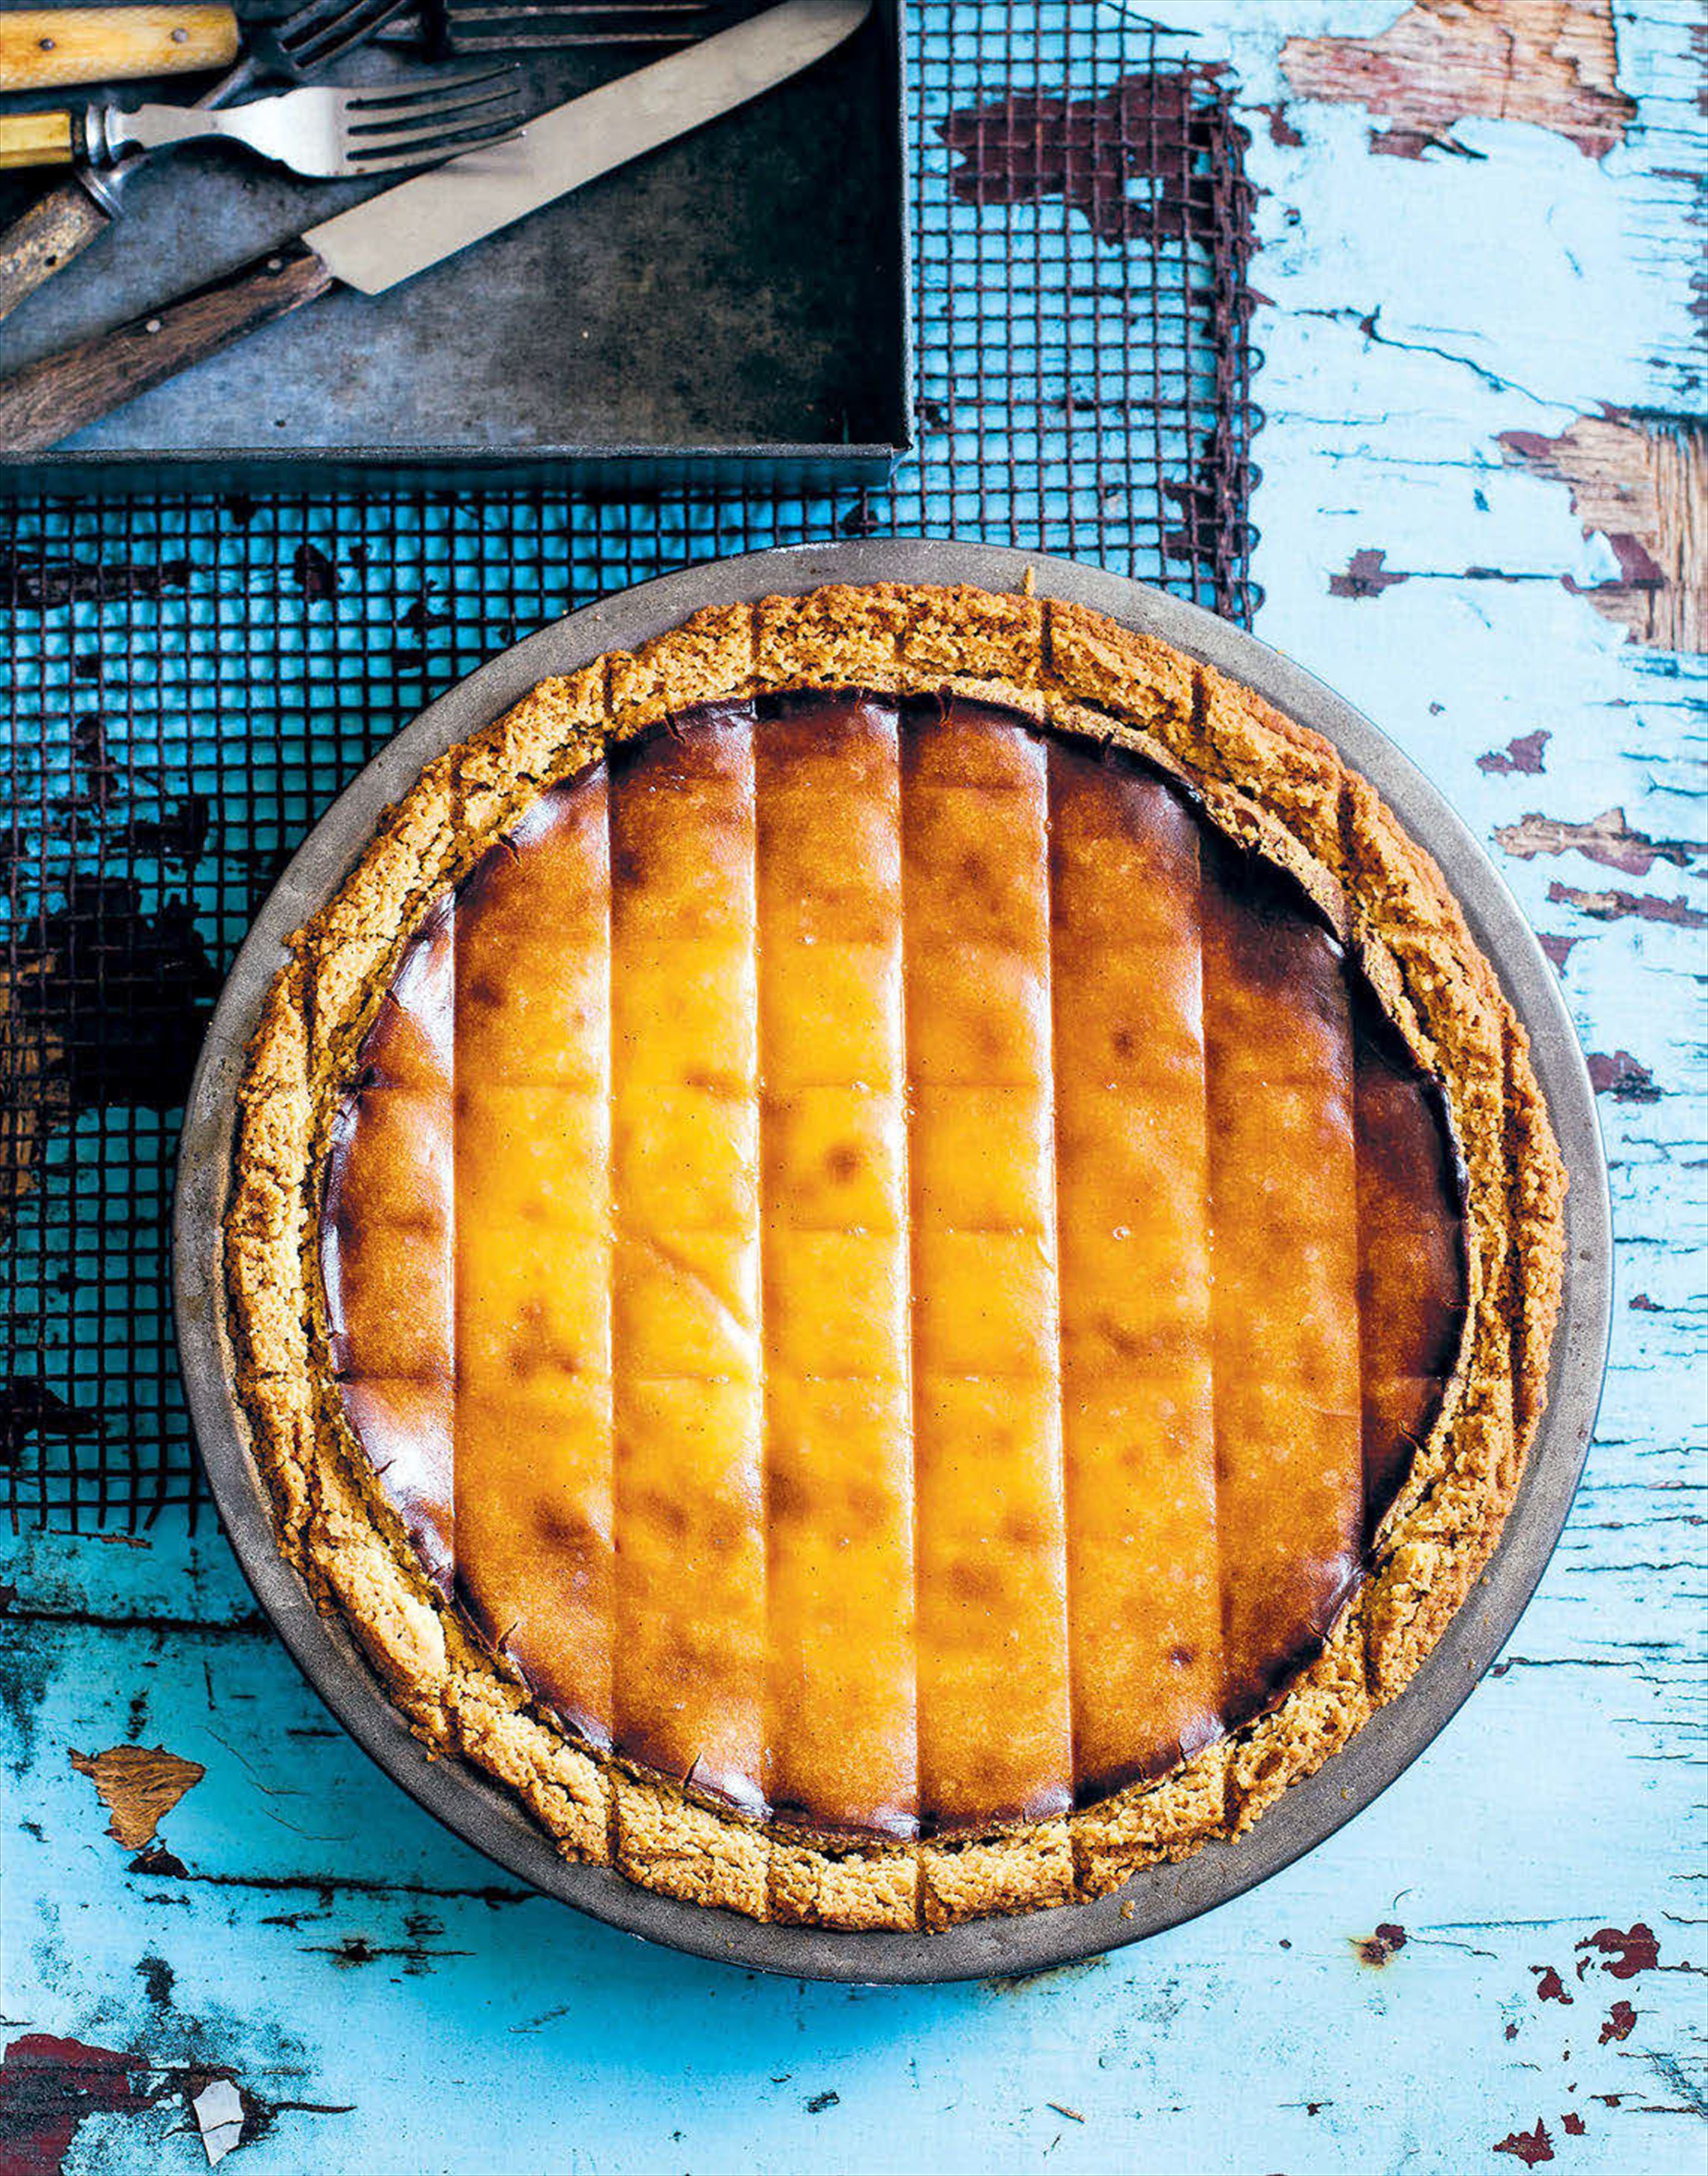 Baked ricotta, orange blossom and date pie